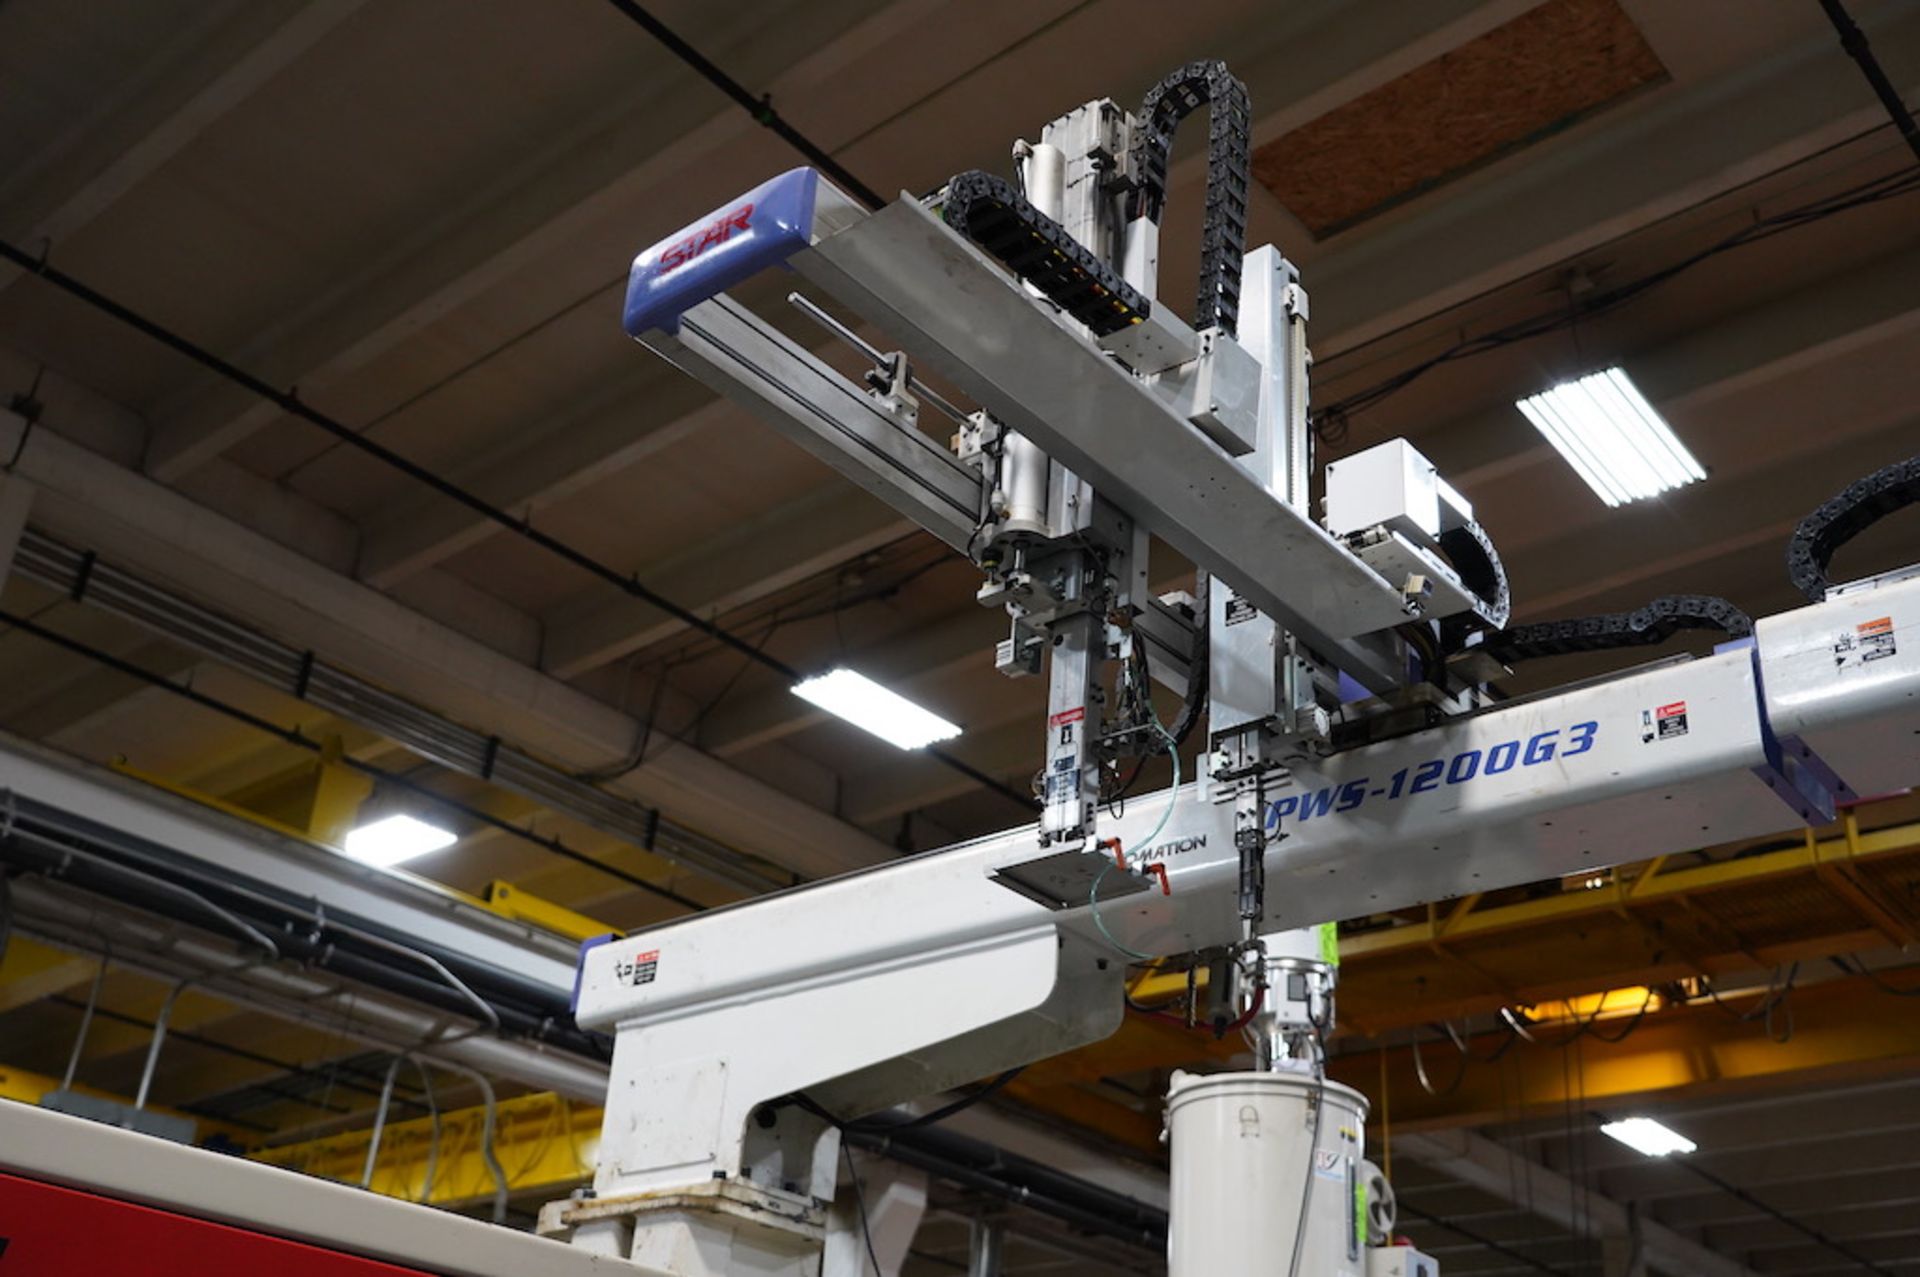 Star Automation NPWS-1200G3 Robot with Pendant Control